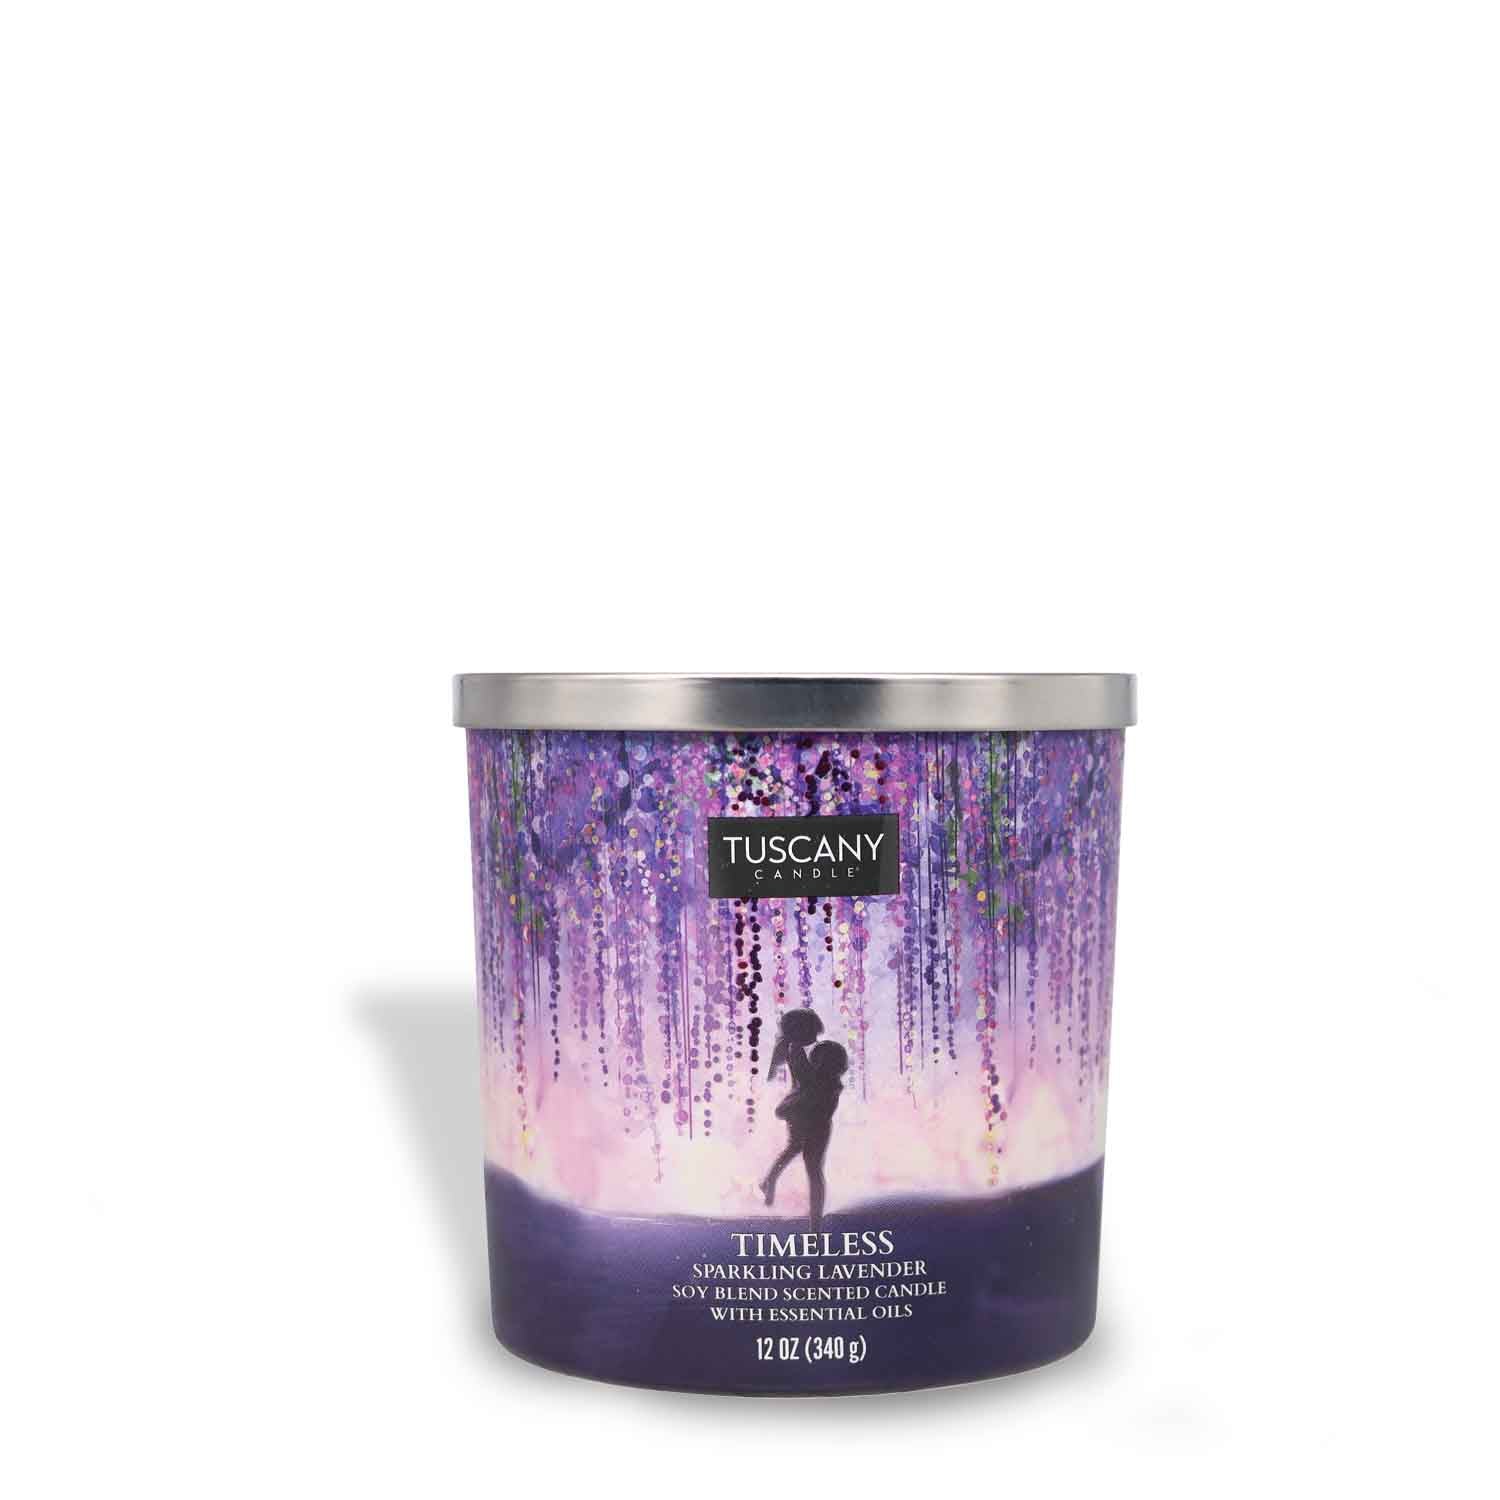 A Timeless Scented Jar Candle (12 oz) from the Tuscany Candle® SEASONAL Carried Away Collection, with a picture of a woman and a man, containing a sensual essential oil blend. This aromatic blend is crafted with a combination of pure essential oils known for their soothing and relaxing properties.